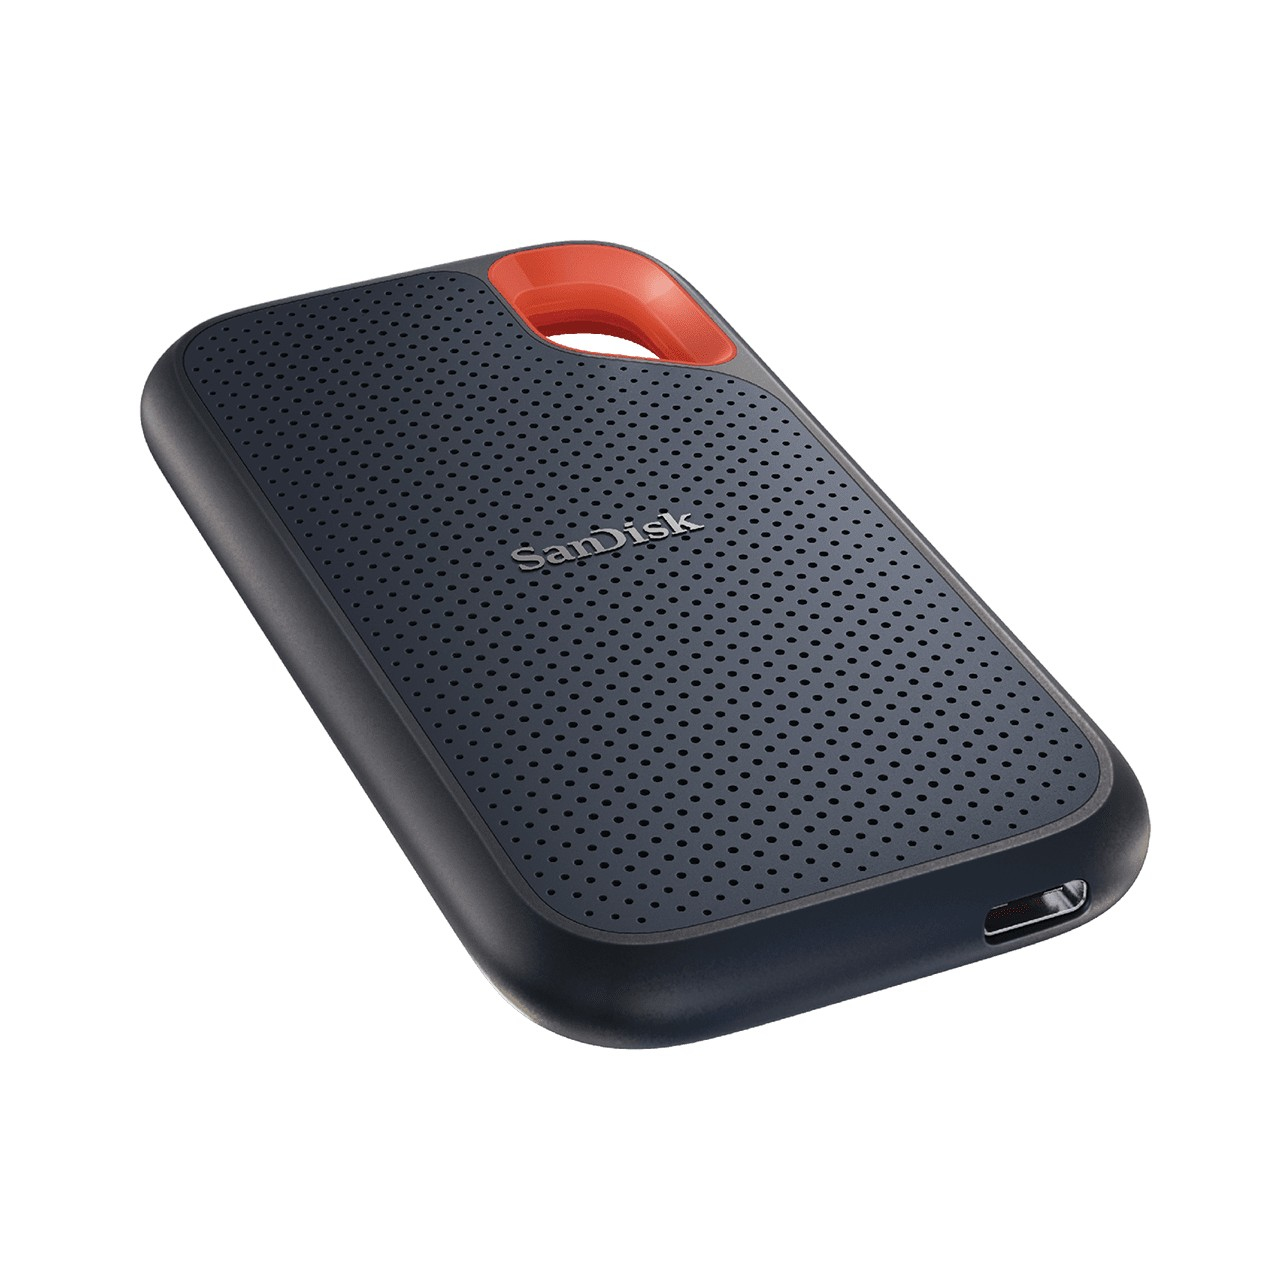 SanDisk Extreme Portable - 1000GB SSD - extern